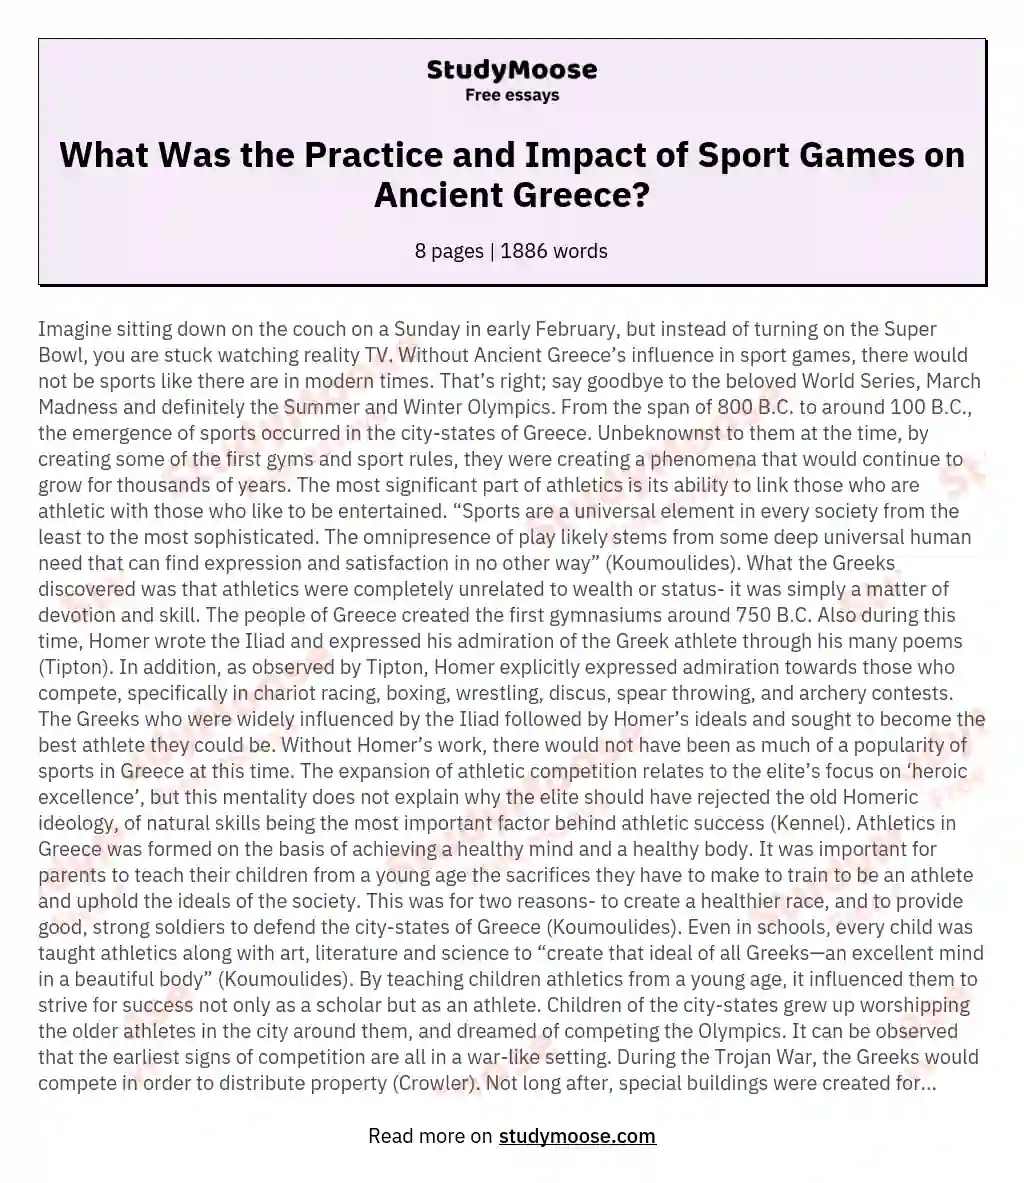 What Was the Practice and Impact of Sport Games on Ancient Greece? essay